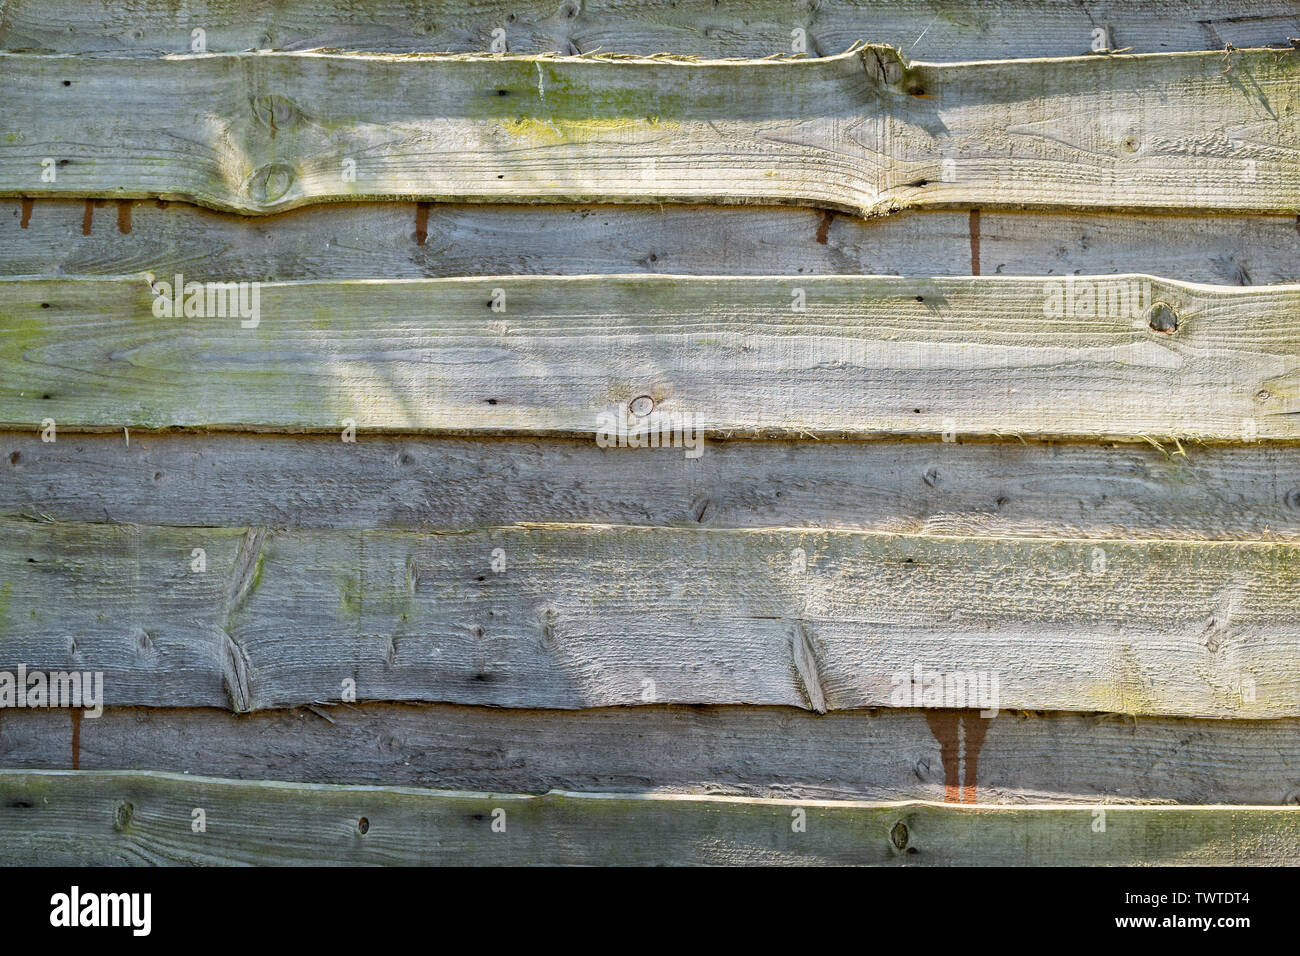 Rough grey wooden garden fencing, with green stains, in sunlight; landscape format. Stock Photo